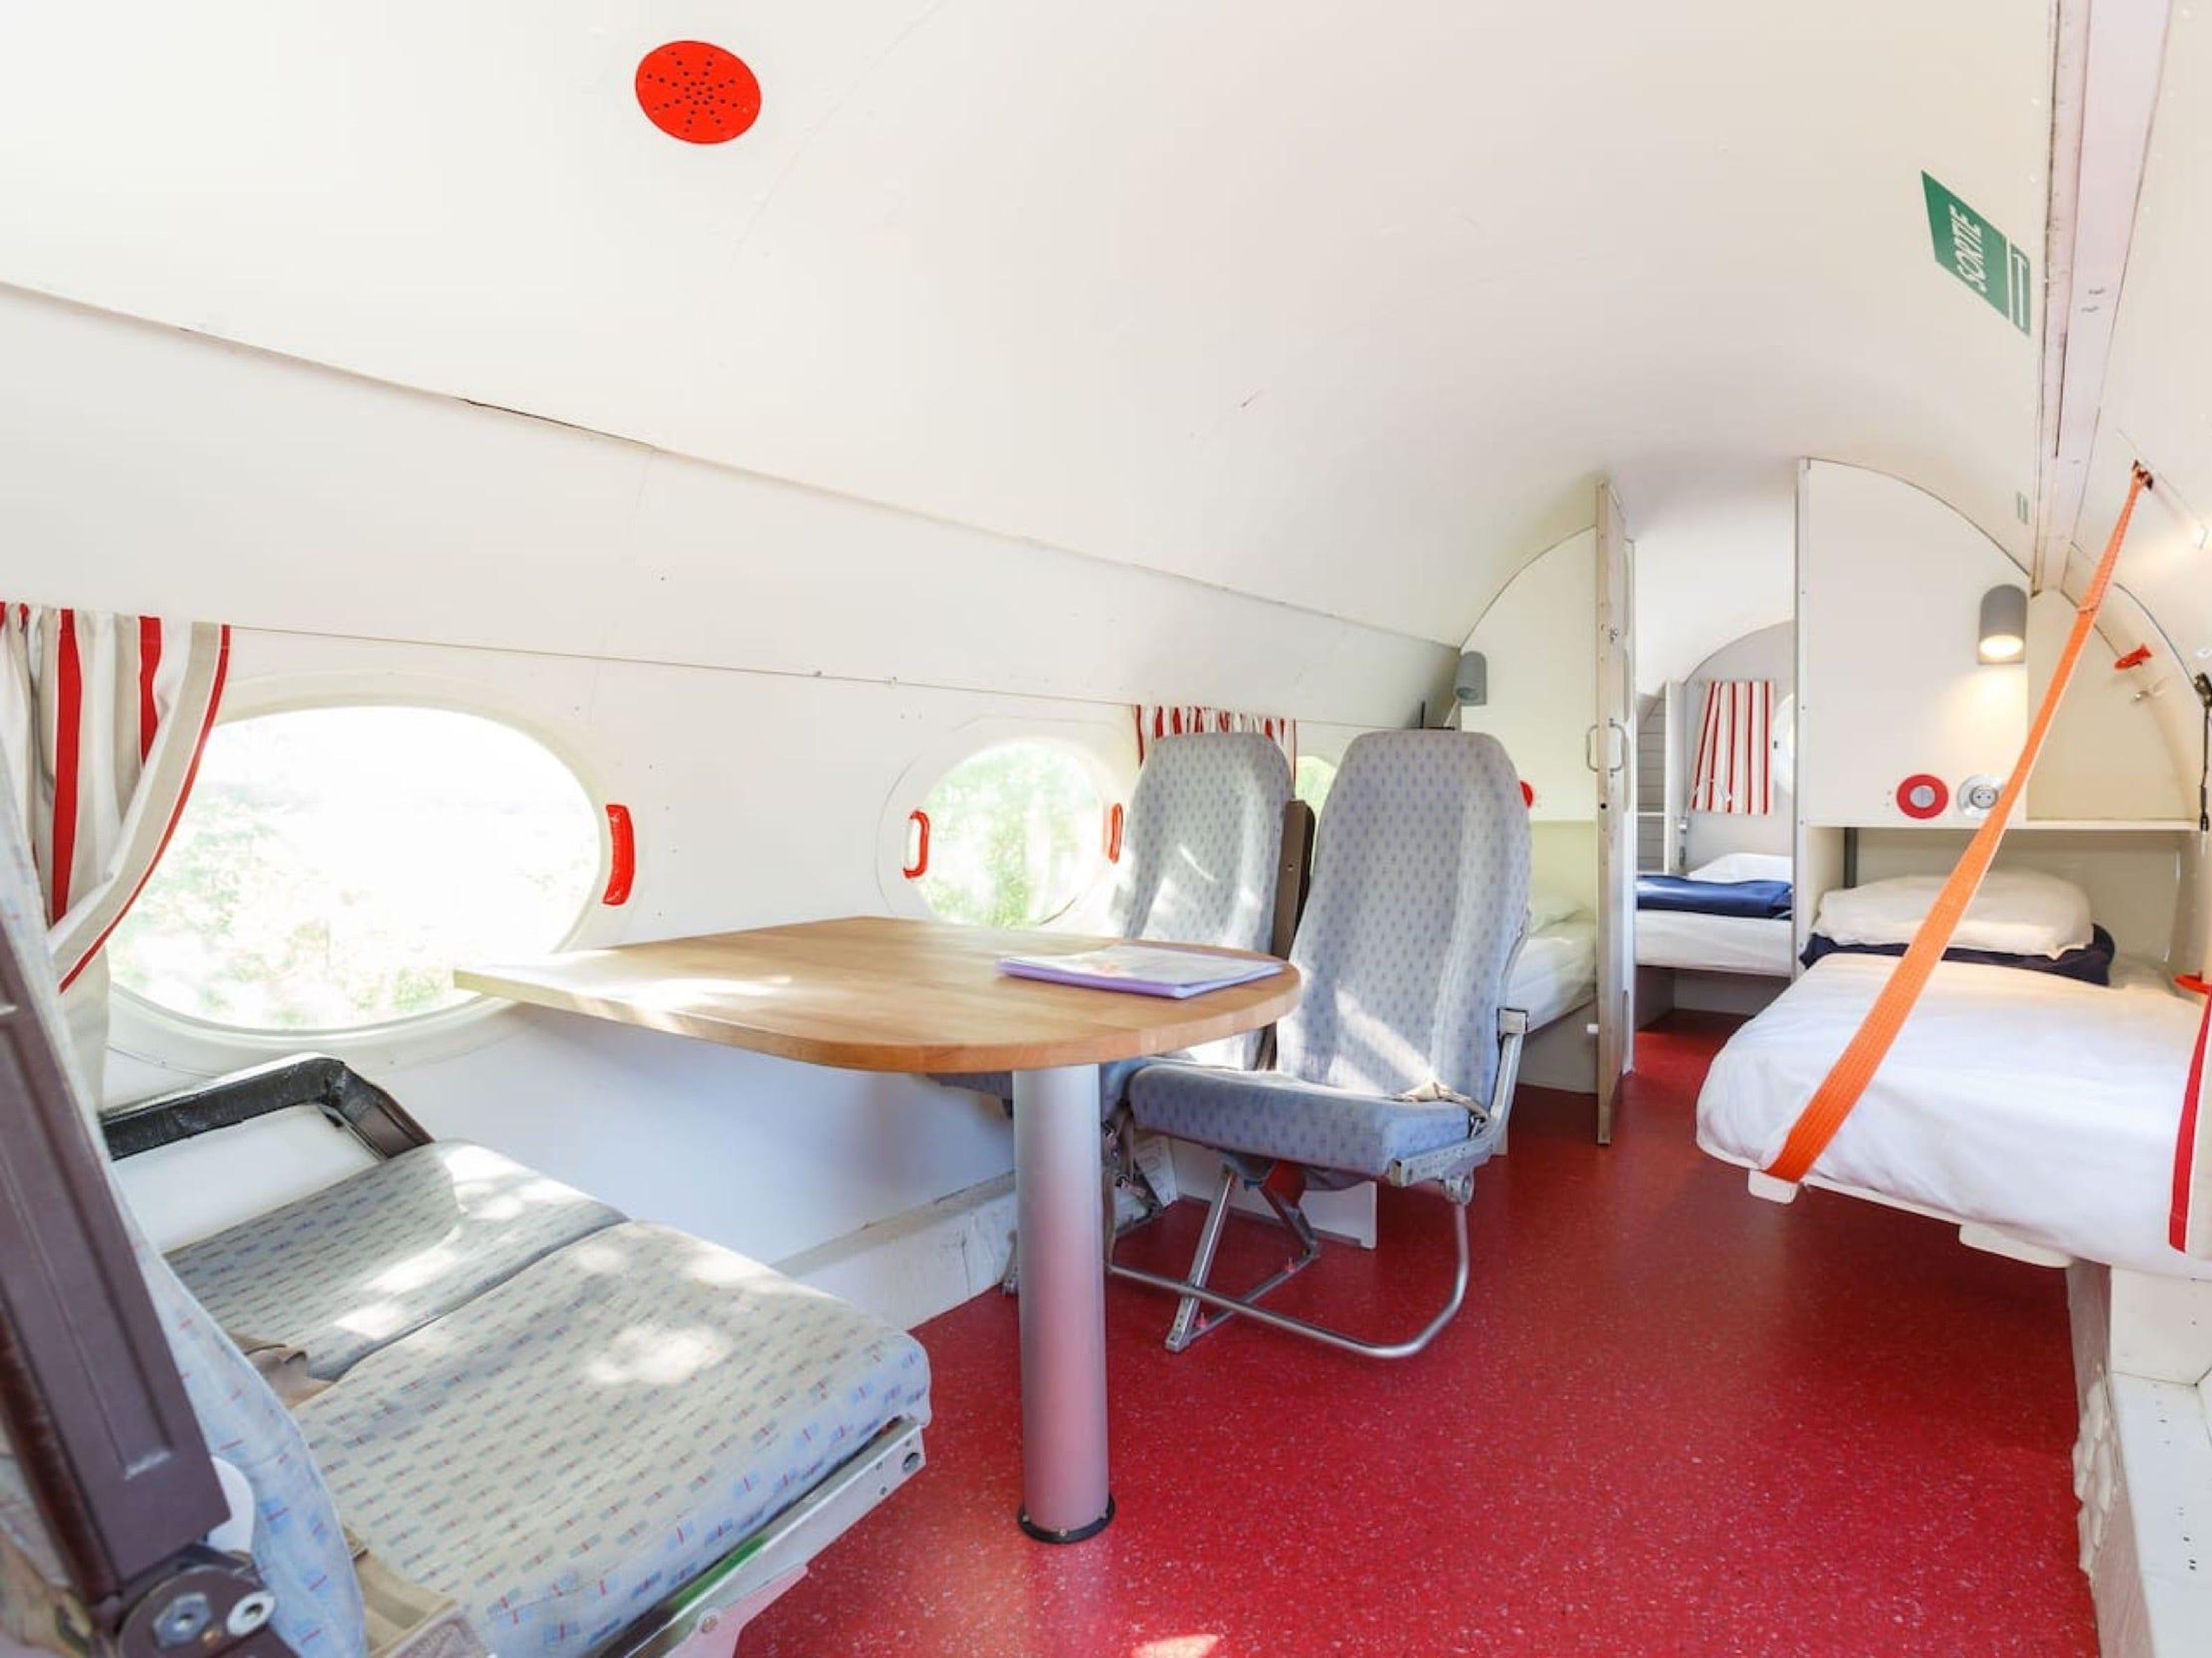 These aircraft-themed Airbnbs are being touted as a way to fly without leaving the ground – take a look at the most unique properties